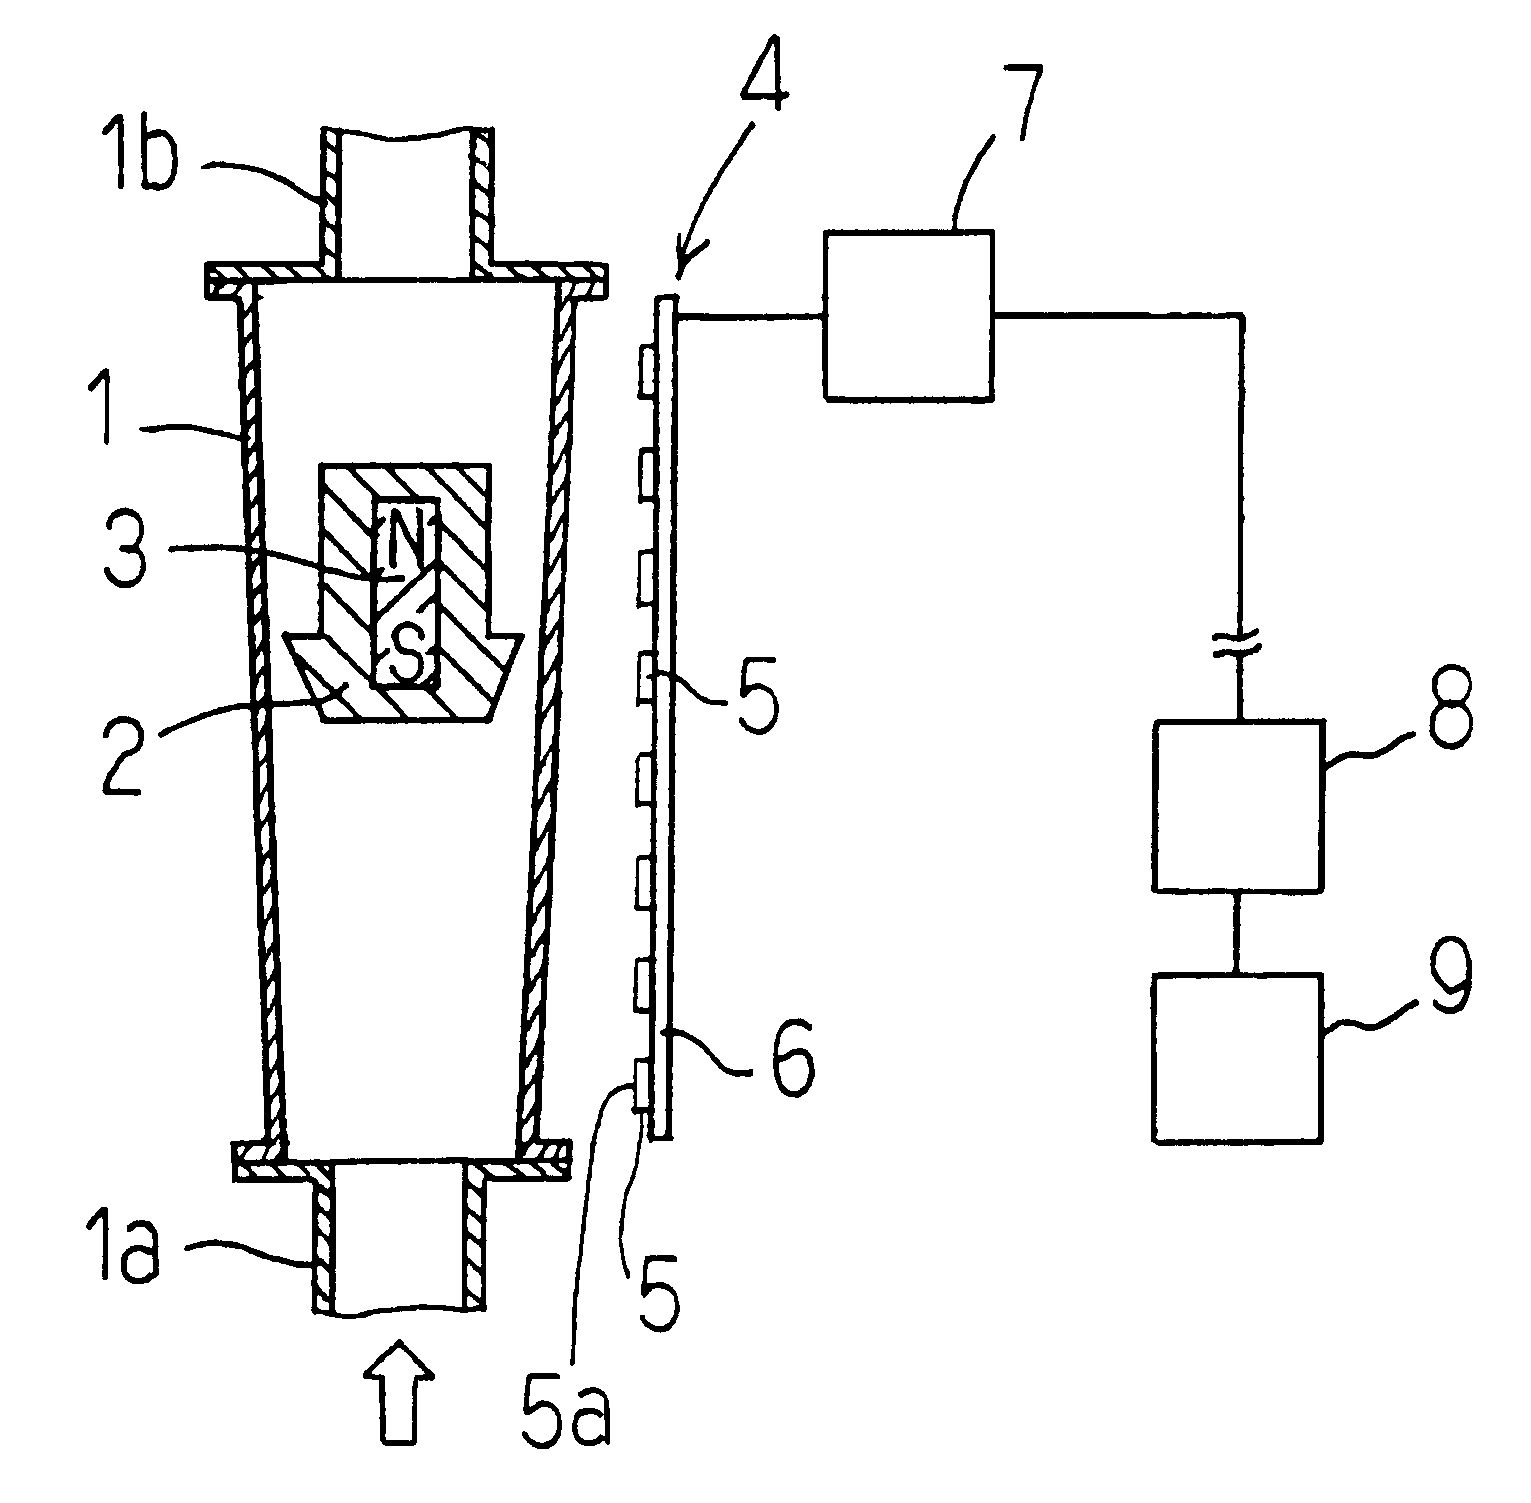 Method and apparatus for detecting displacement of a magnet moved in response to variation of a physical characteristic of a fluid